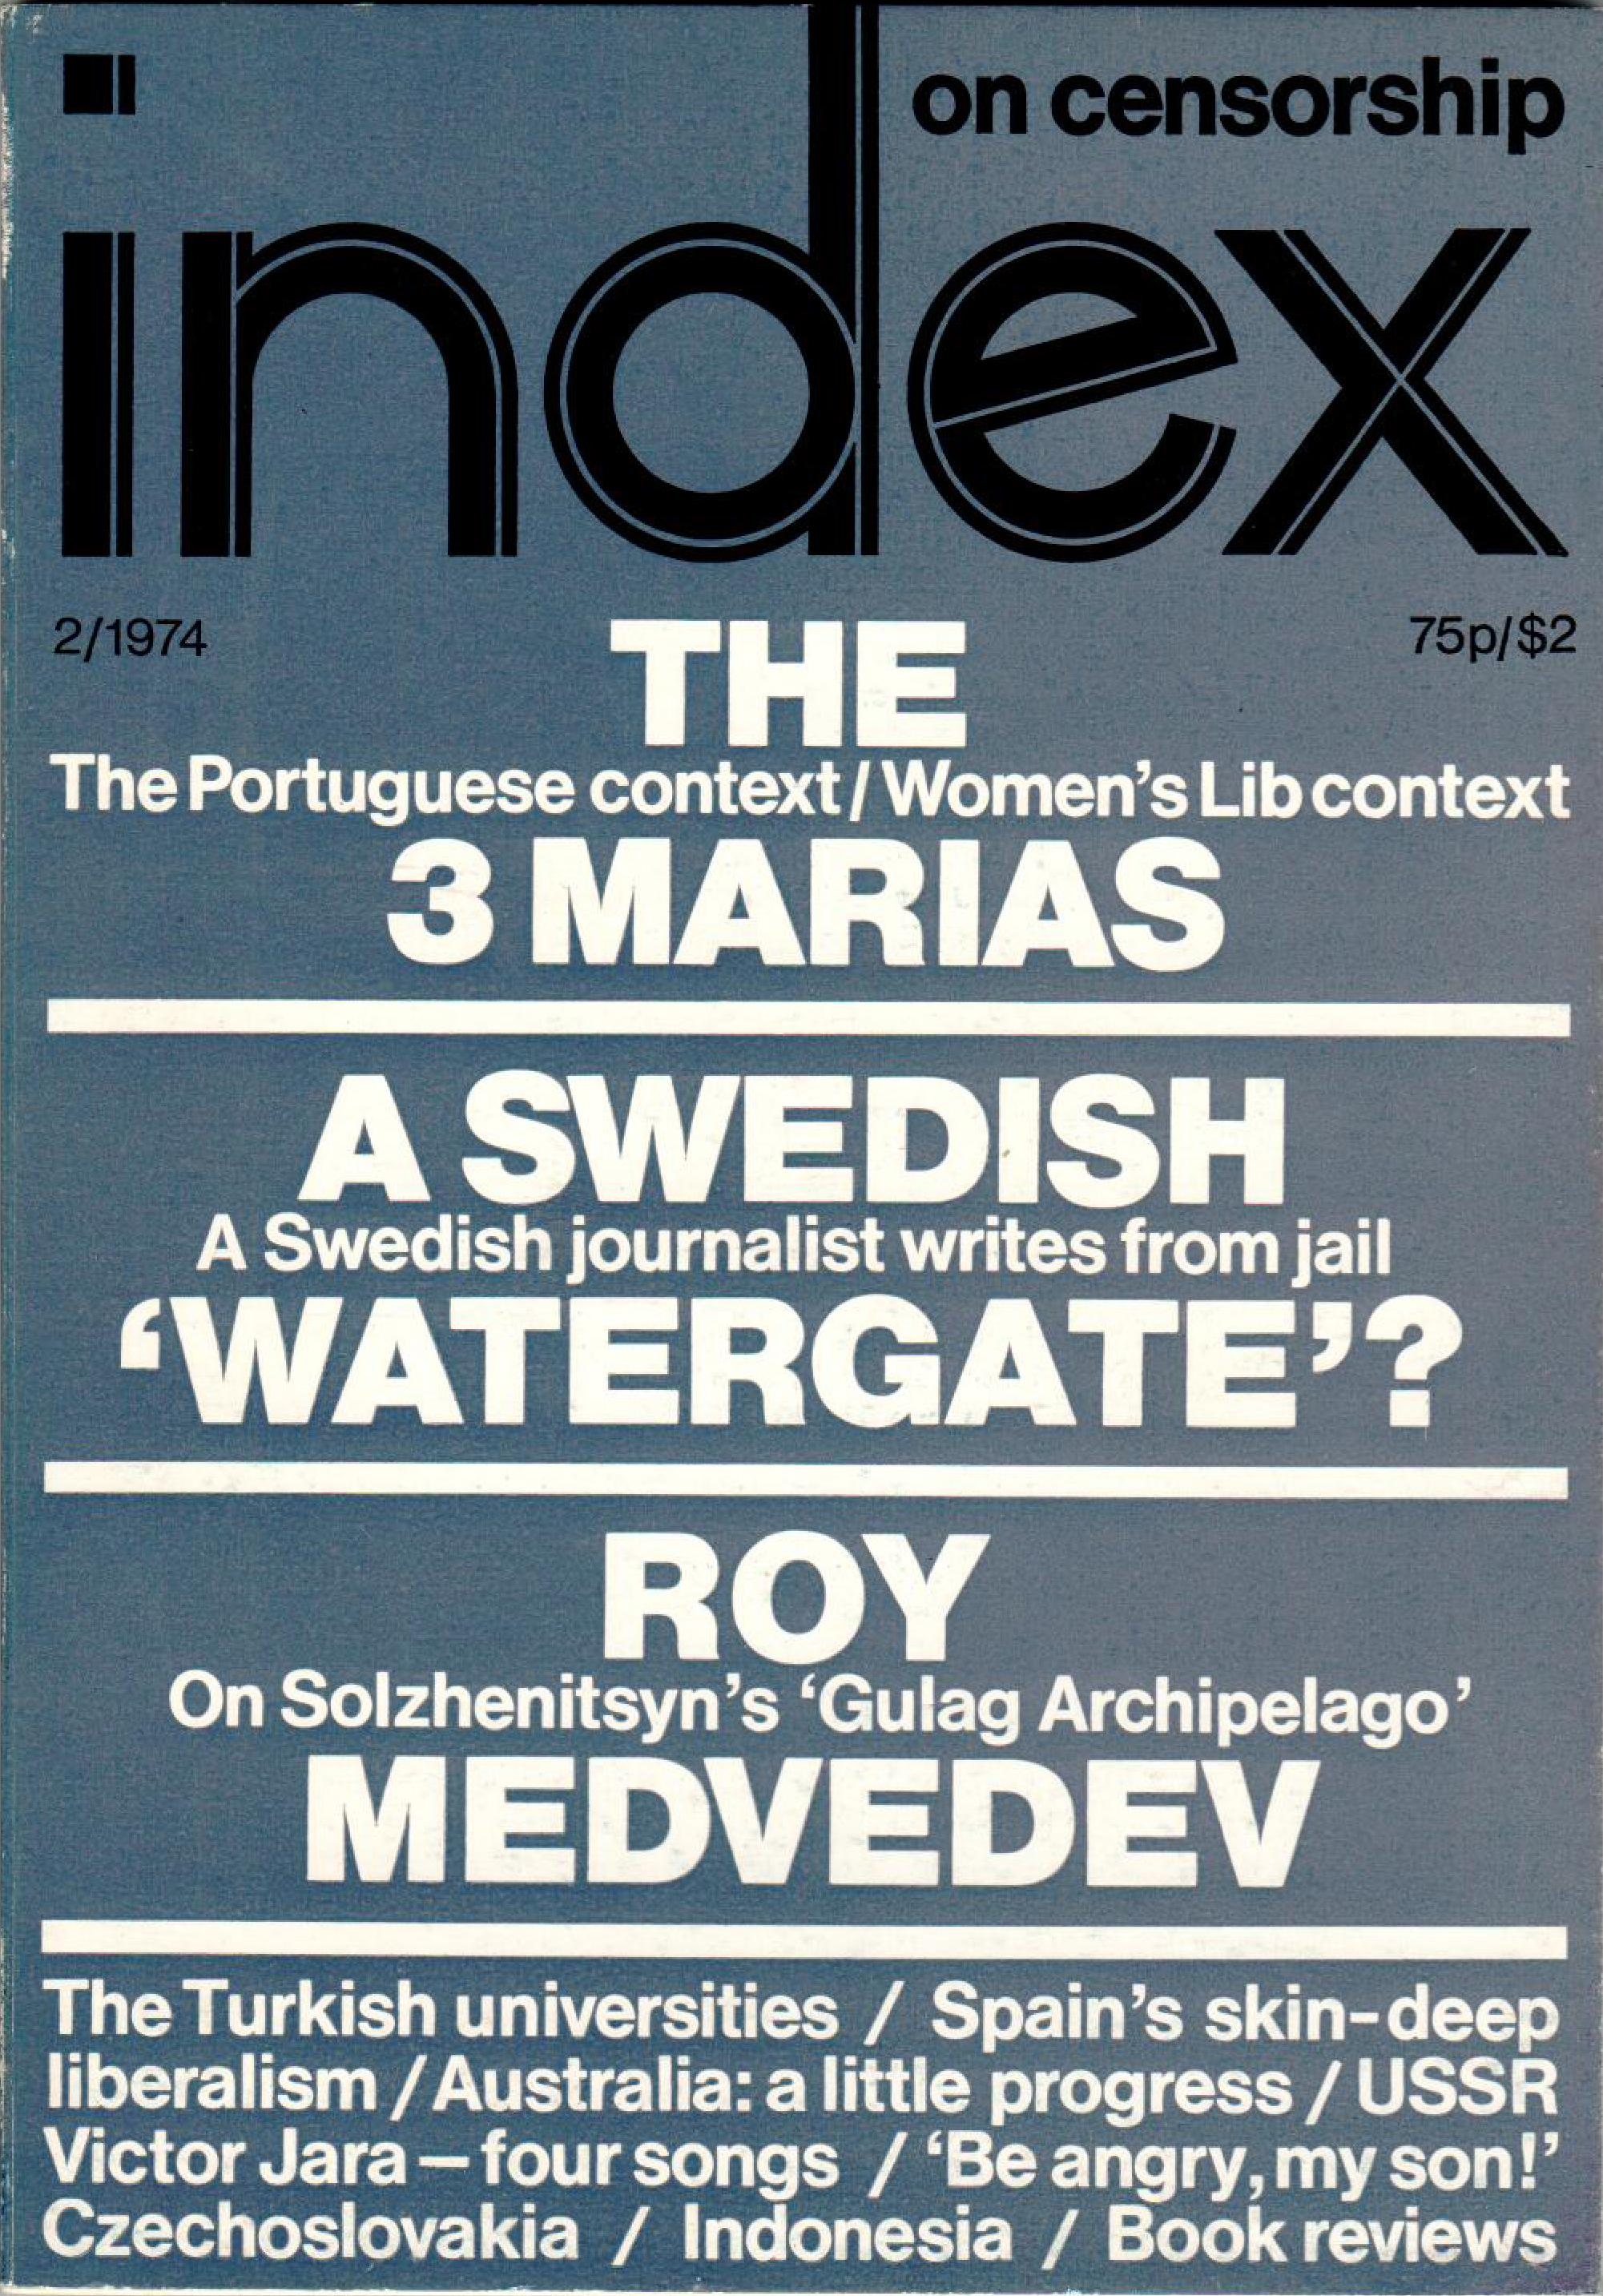 The 3 Marias, the Summer 1974 issue of Index on Censorship magazine